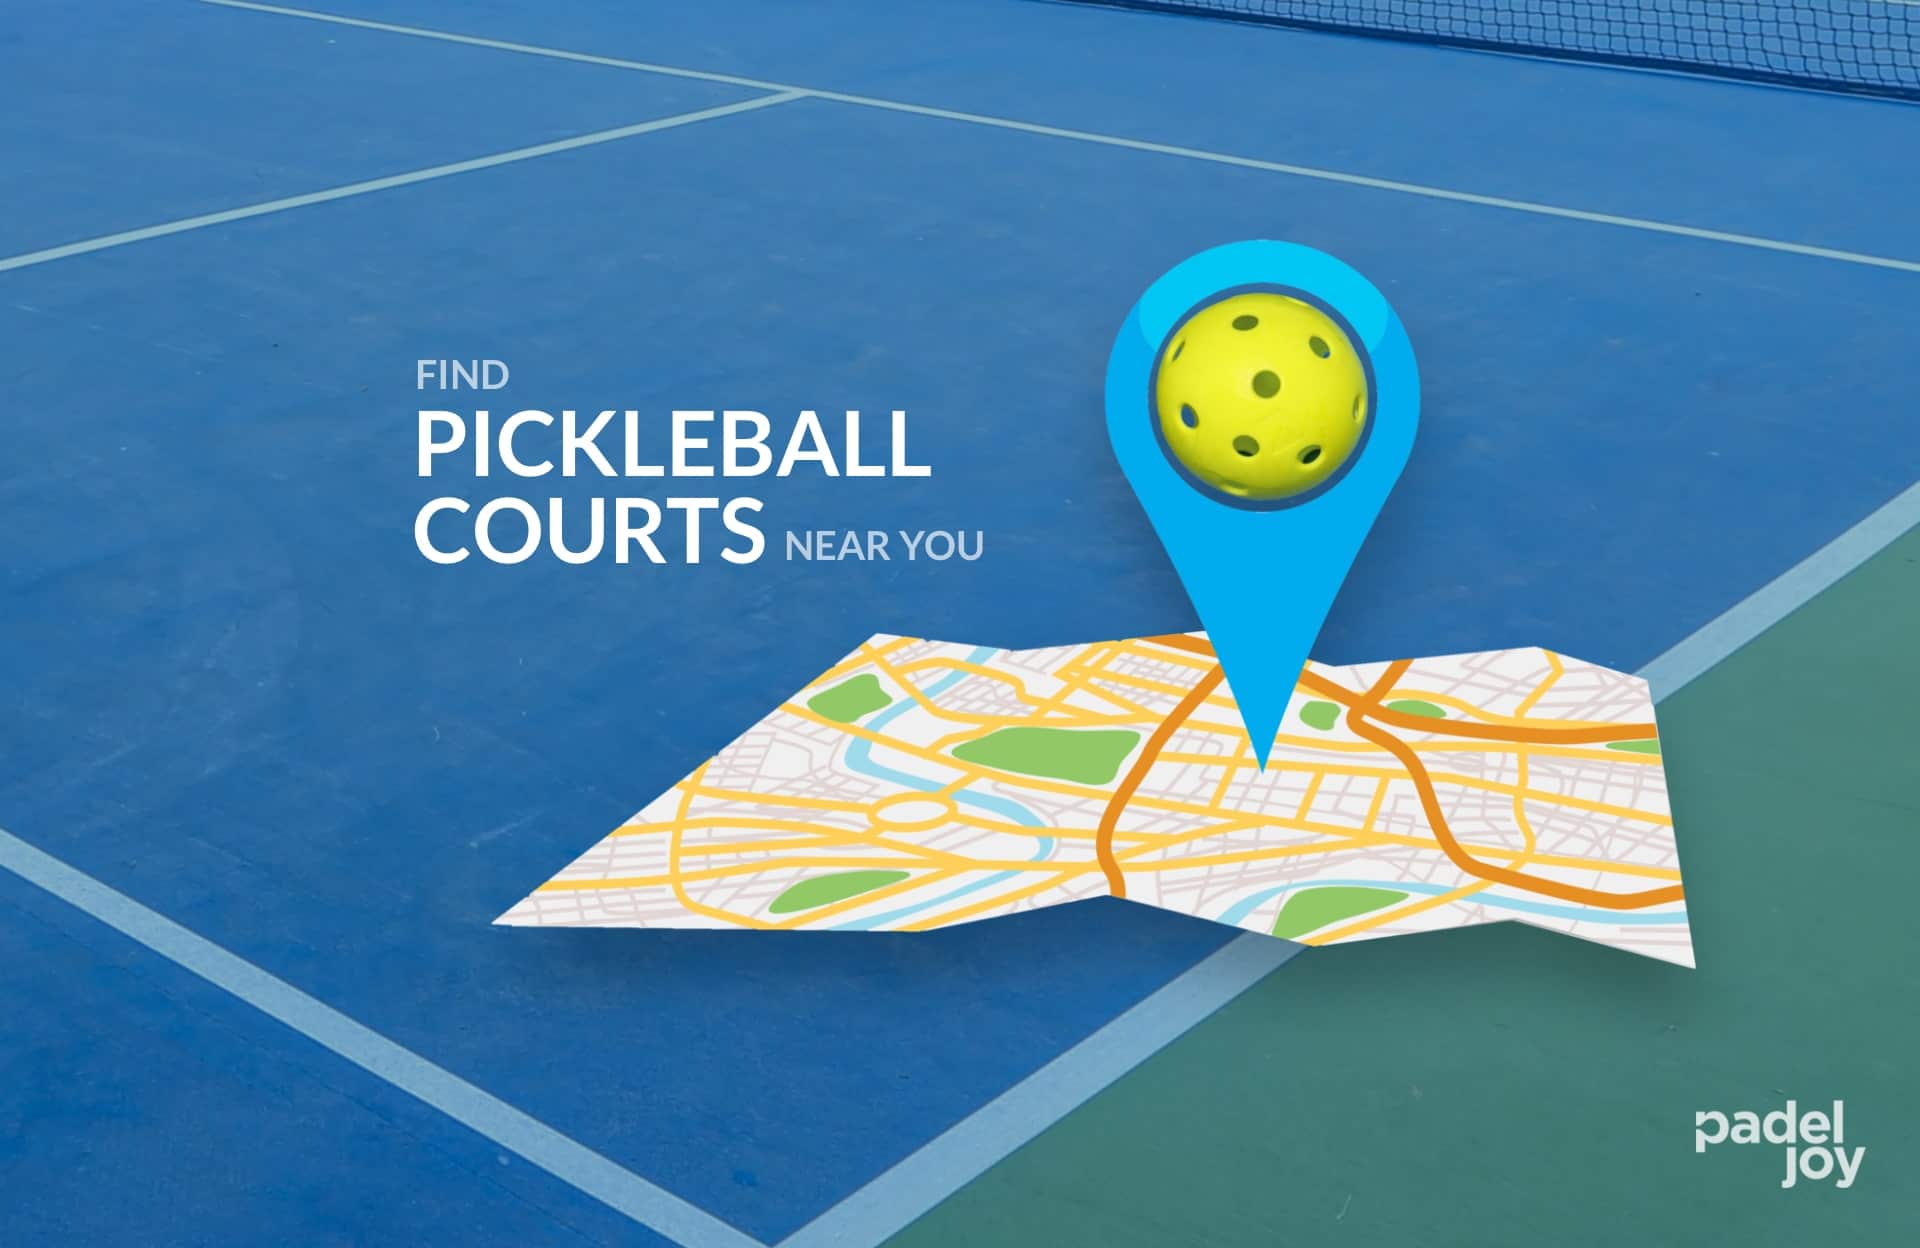 How To Find Pickleball Courts Near Me – Where Can I Play?